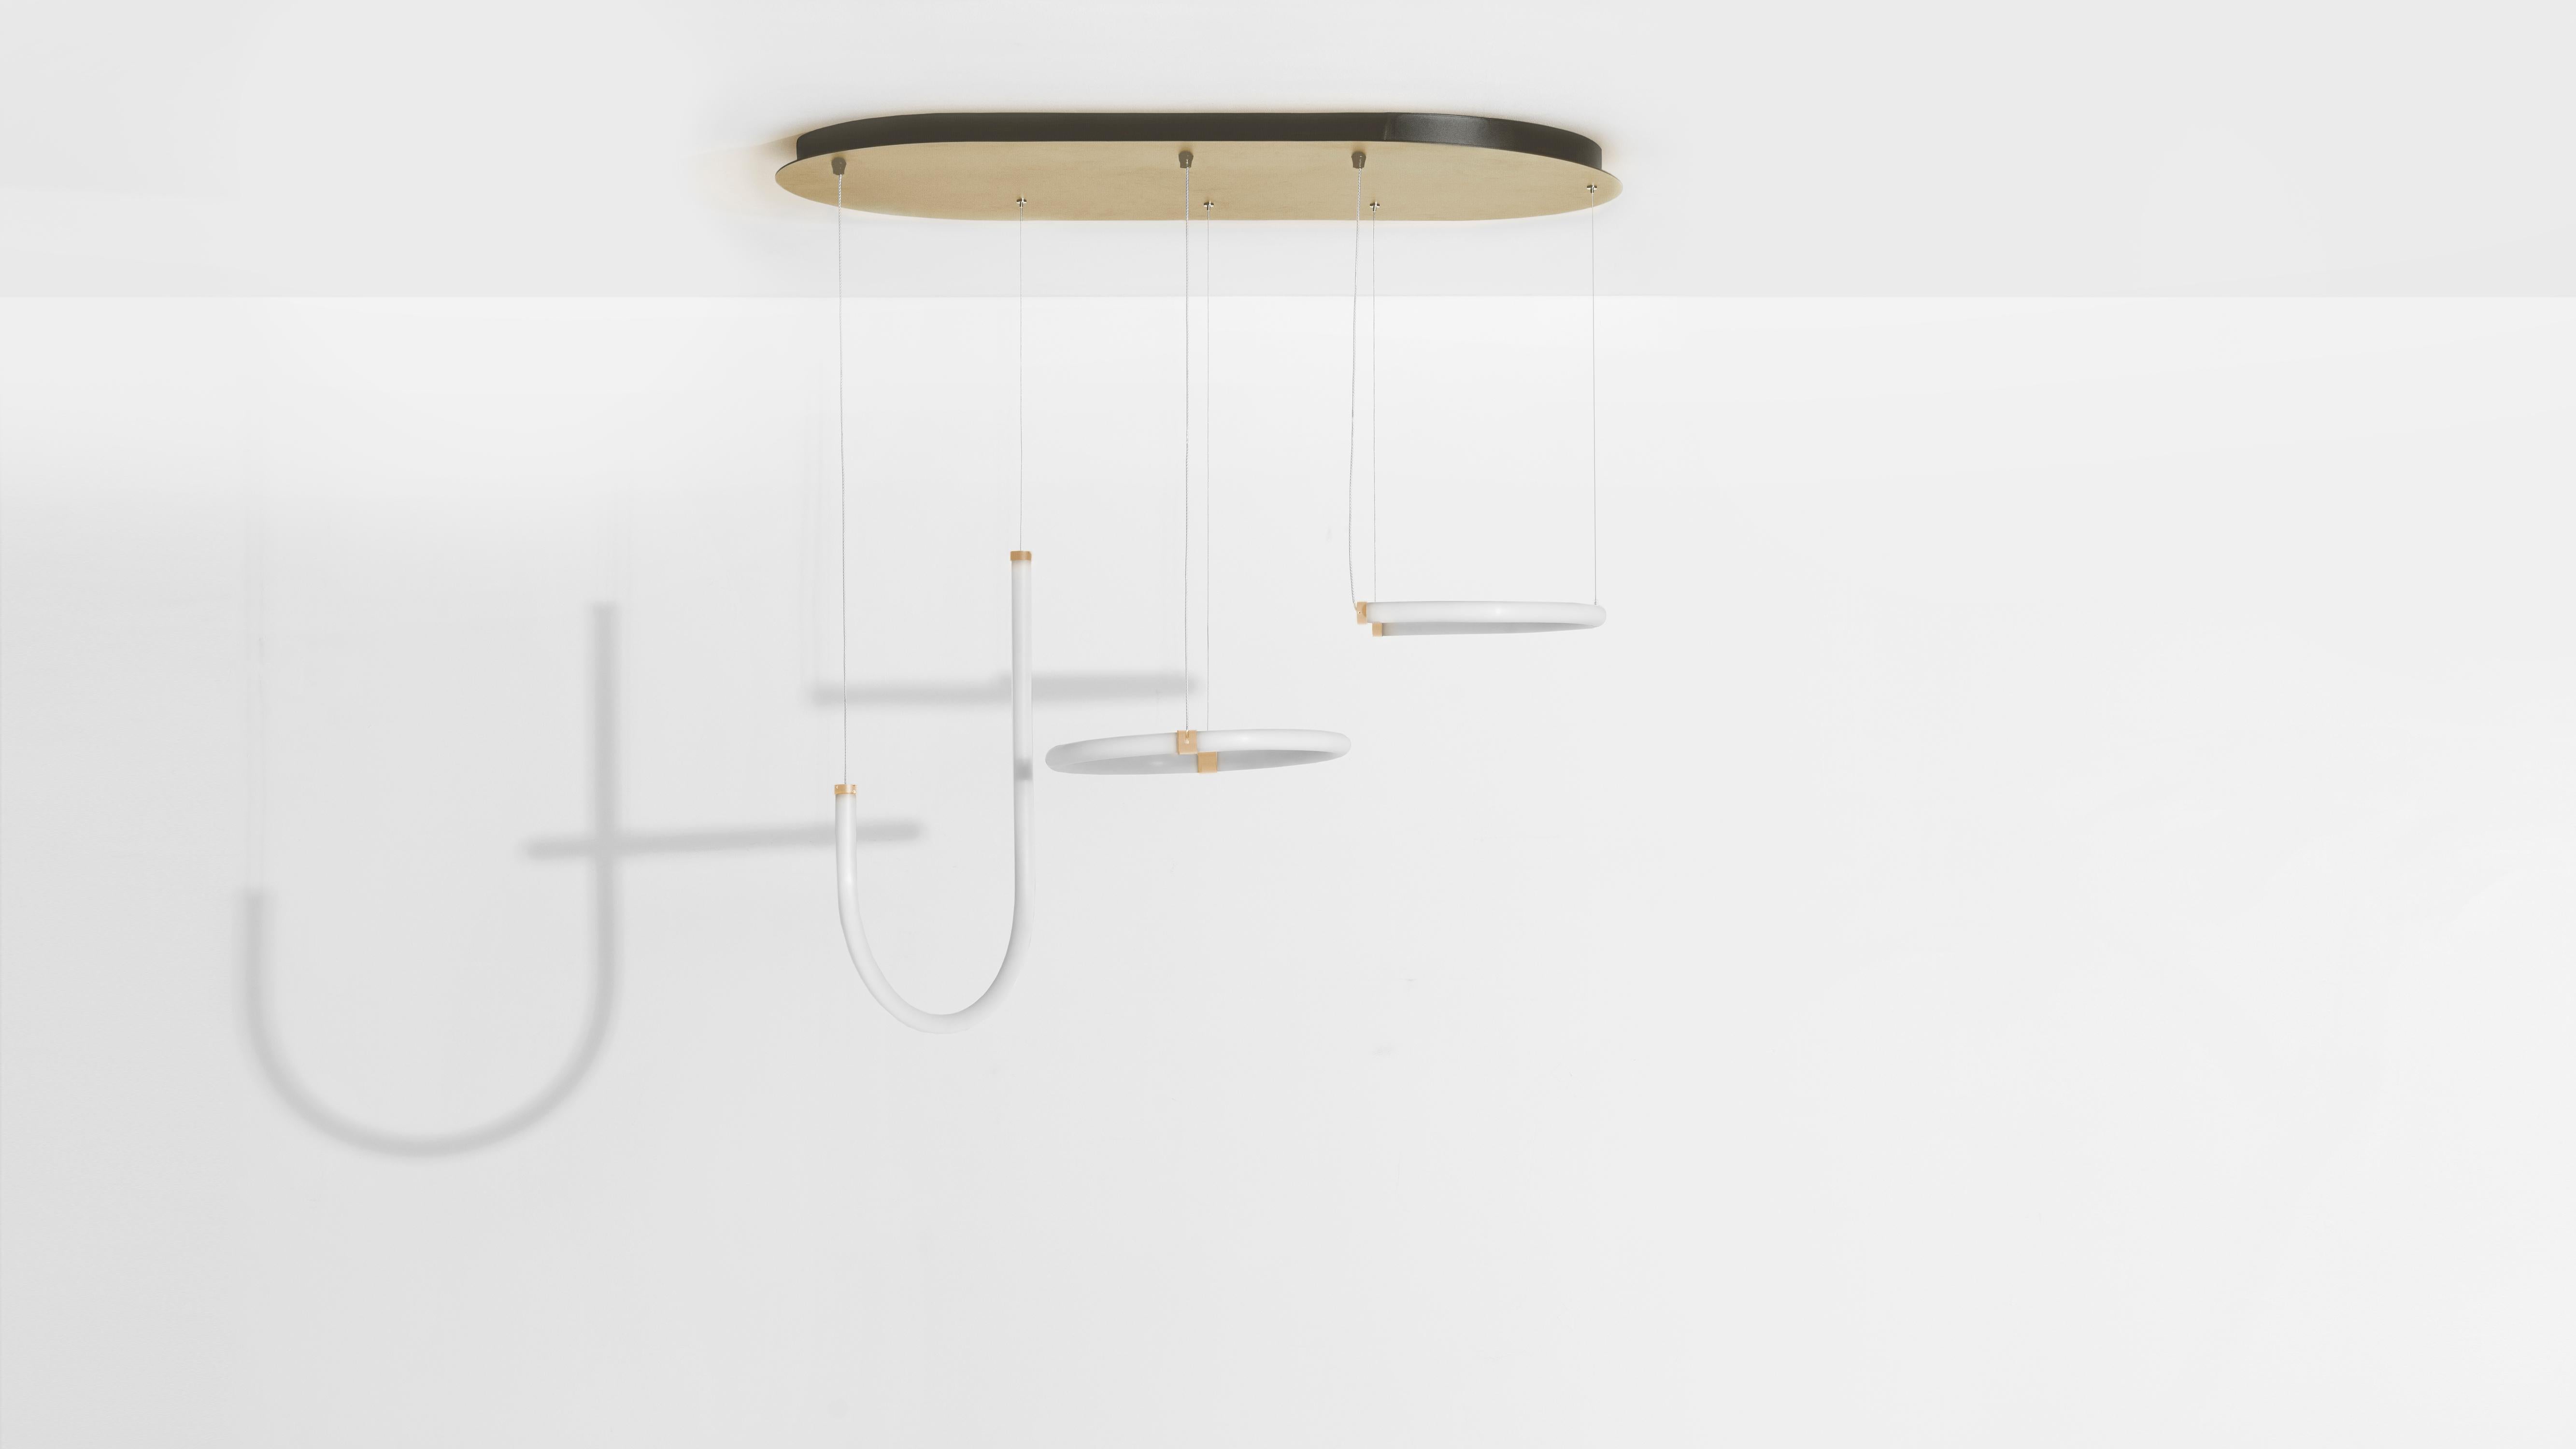 Contemporary Petite Friture Unseen Triple Pendant Light System in Brass Transluscent For Sale